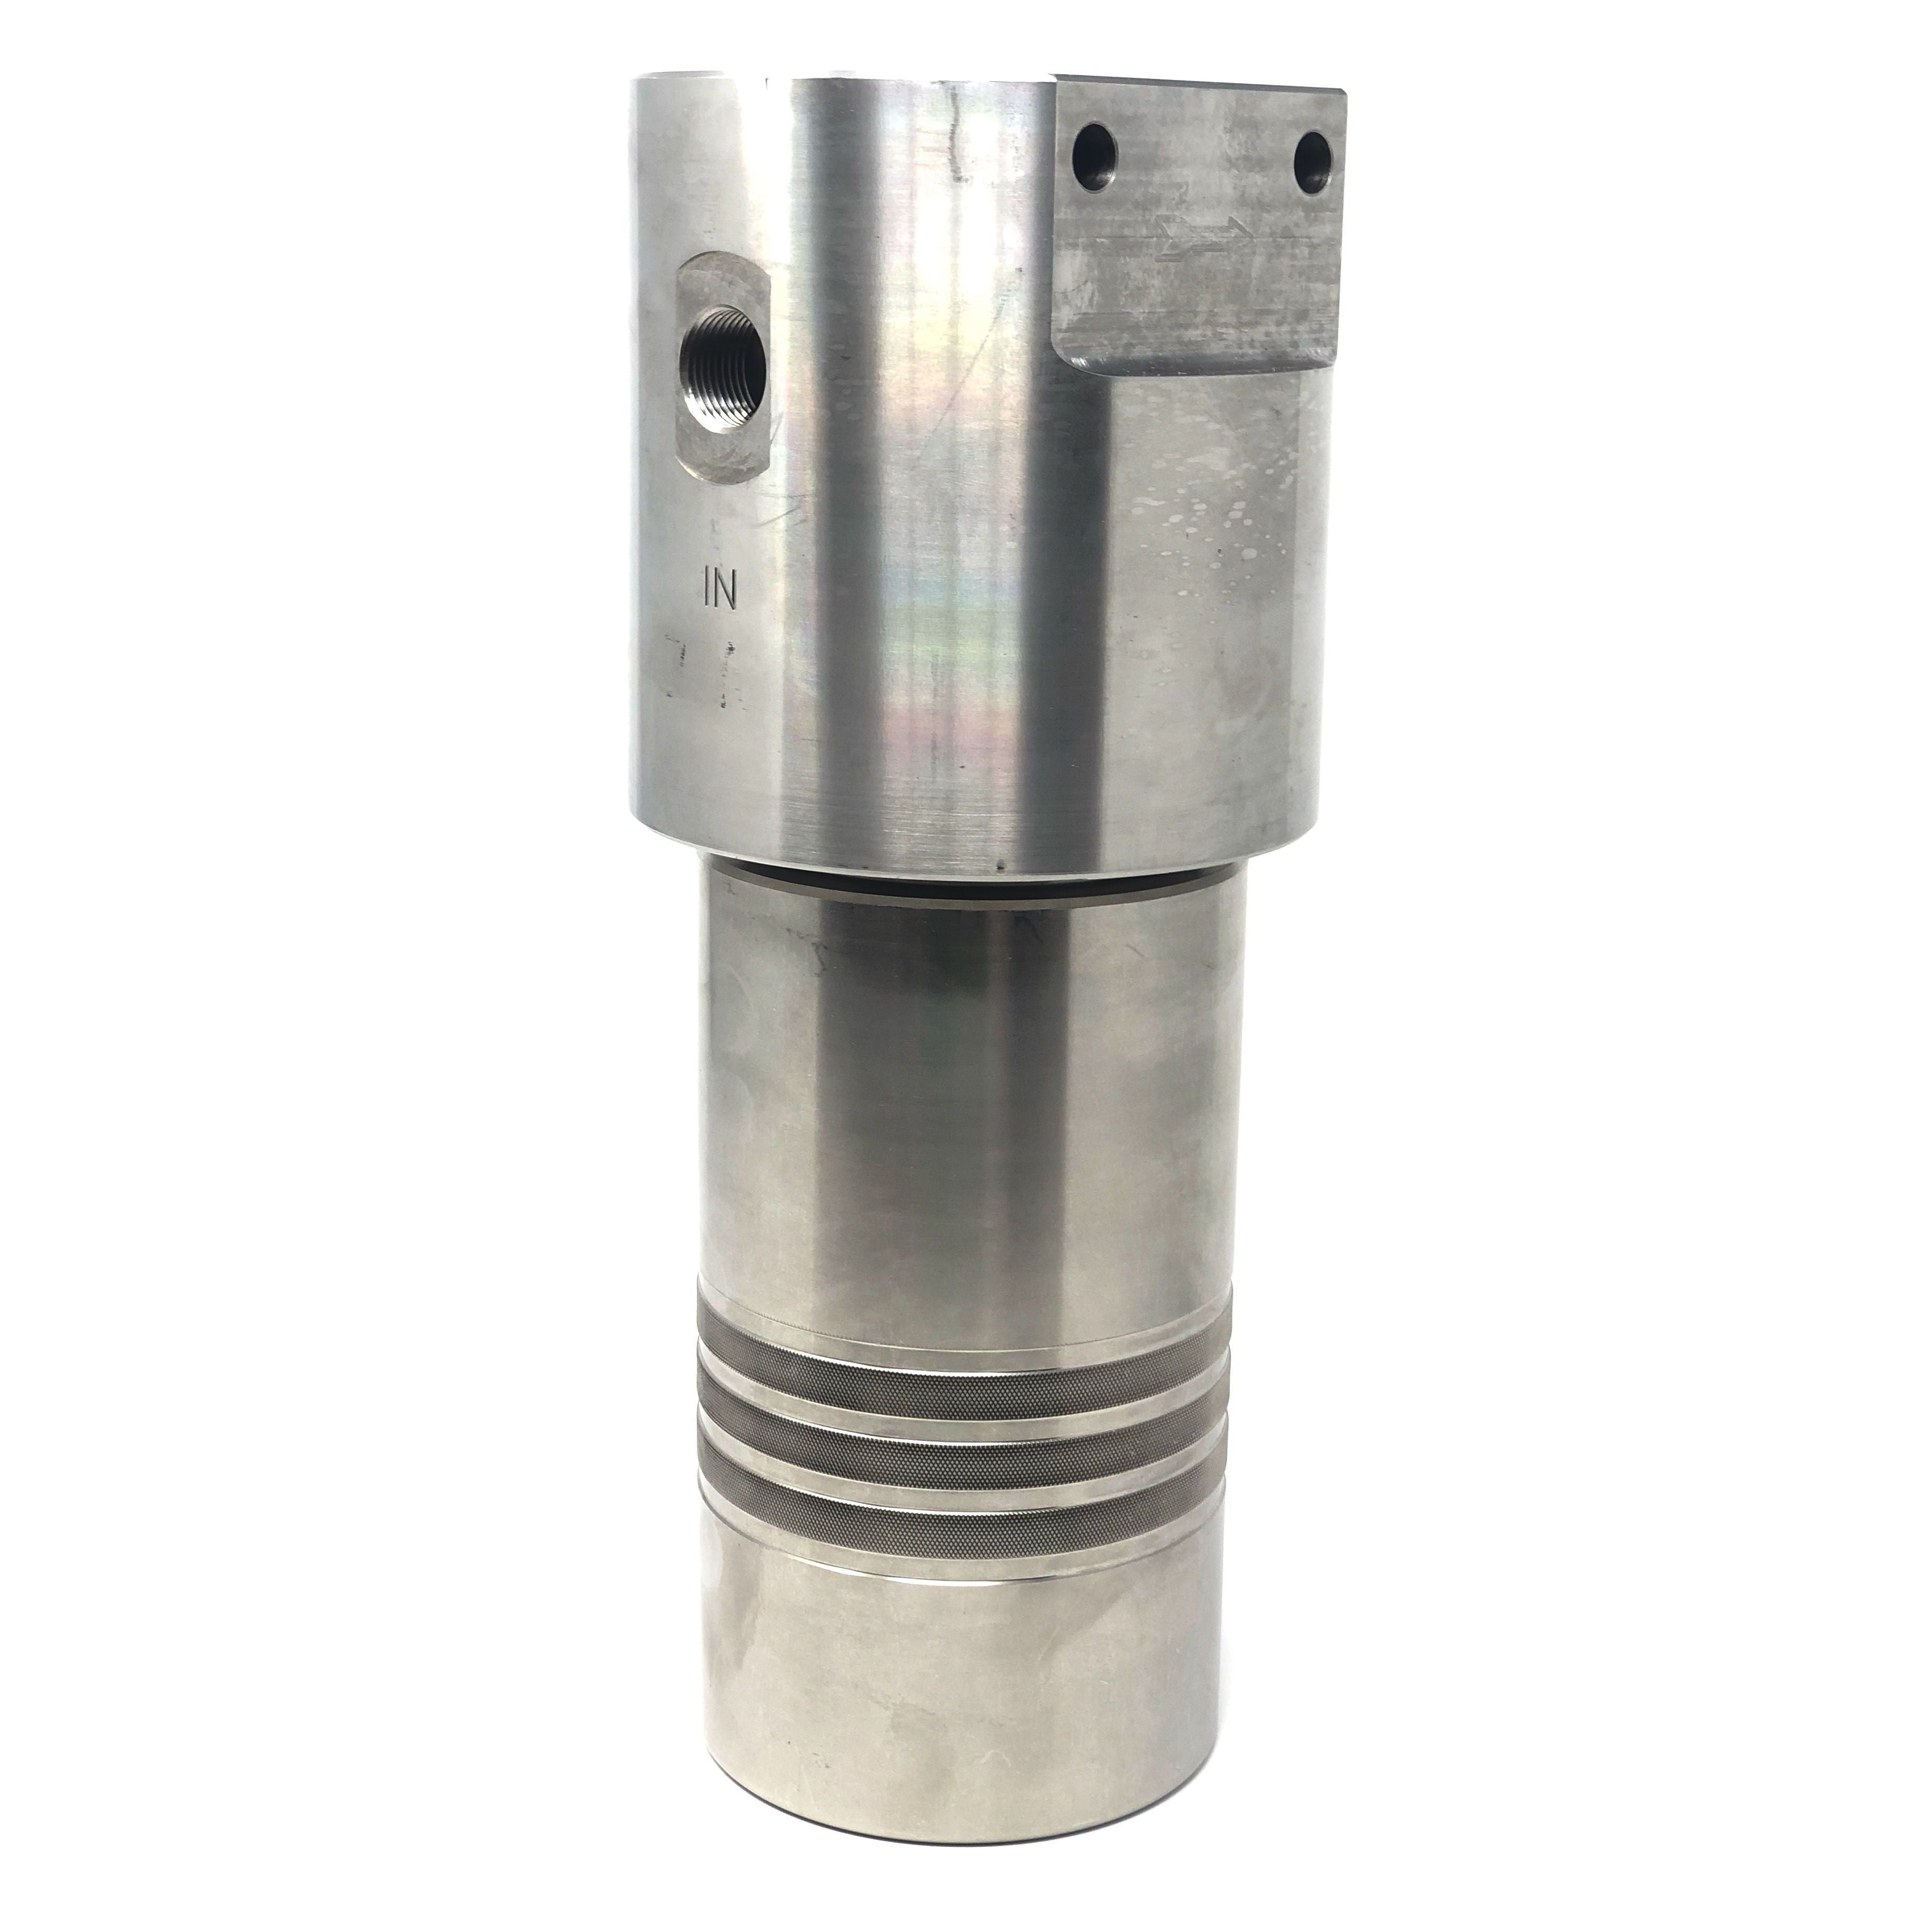 52S-244S-40SEN : Chase Ultra High Pressure Inline Filter, 10000psi, #4 SAE (1/4"), 40 Micron, With Visual Indicator, No Bypass